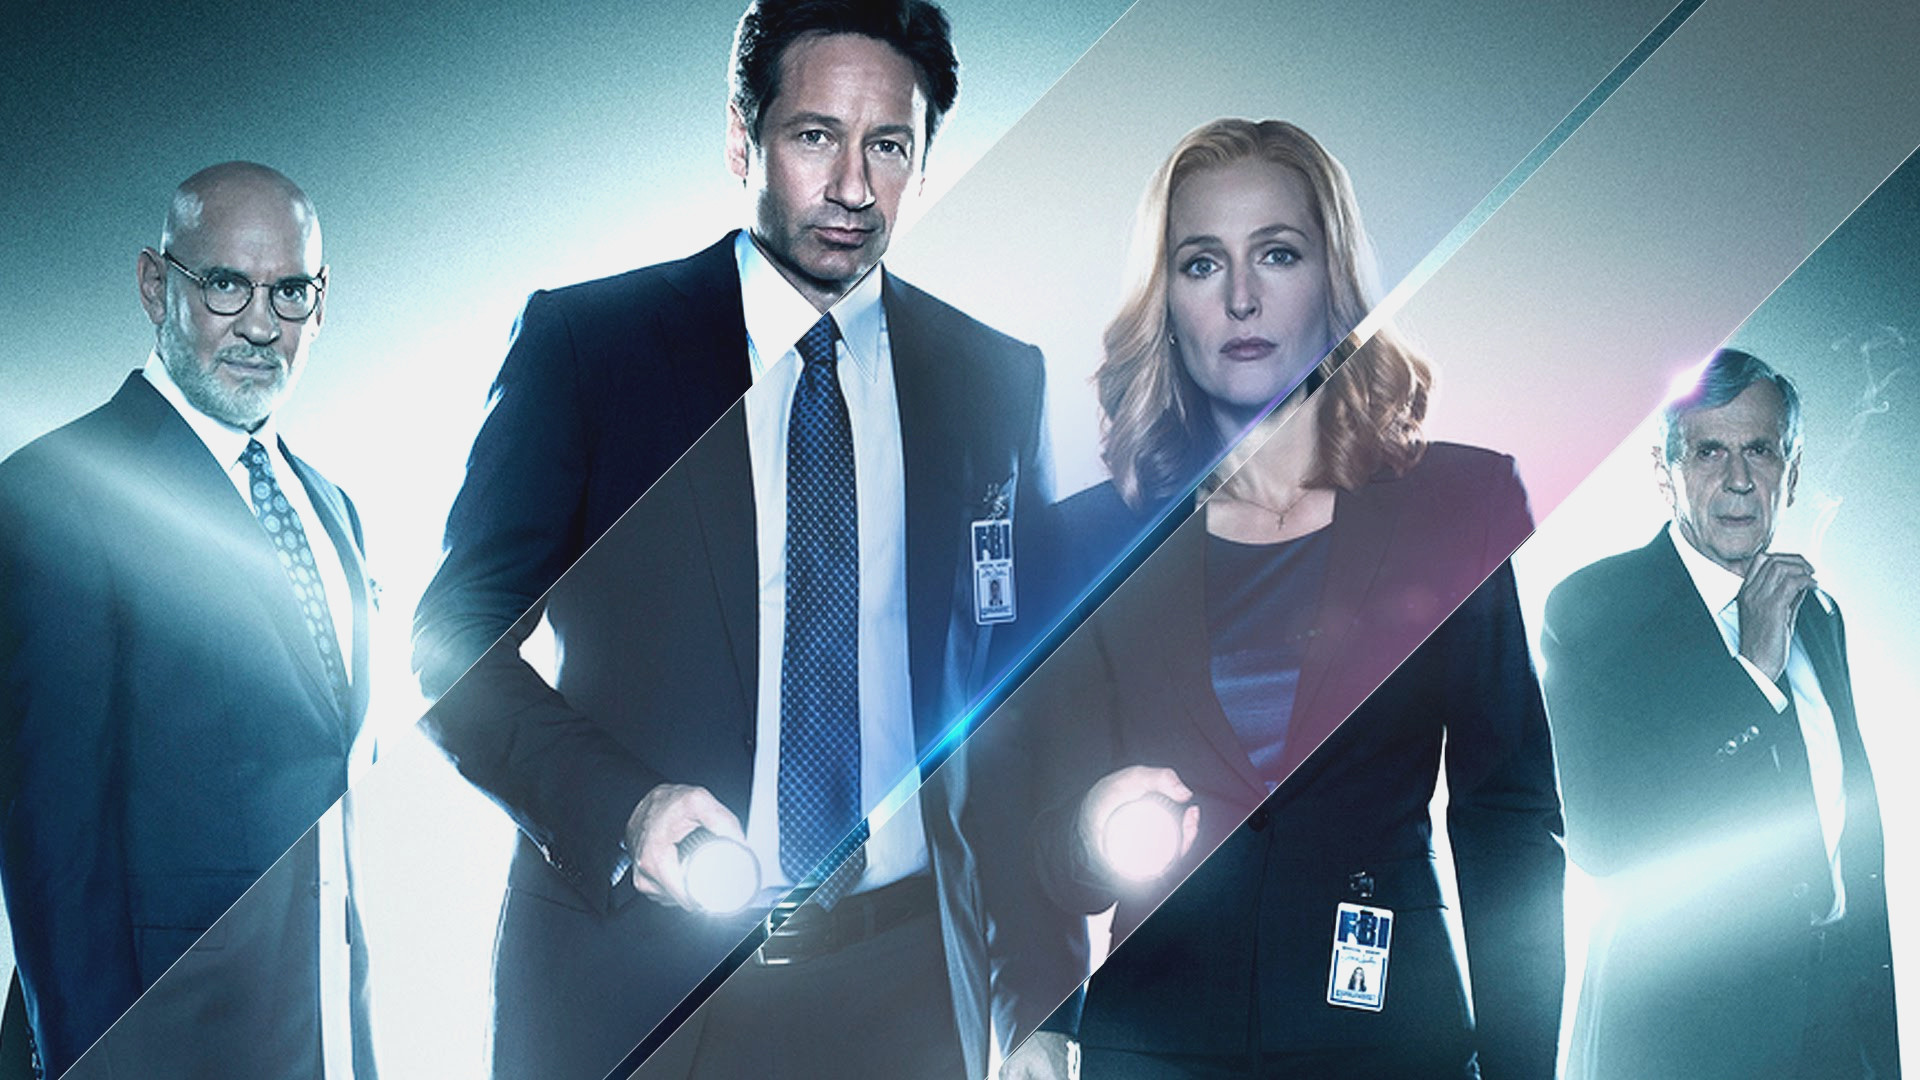 1920x1080 The X-files Free Desktop Backgrounds top